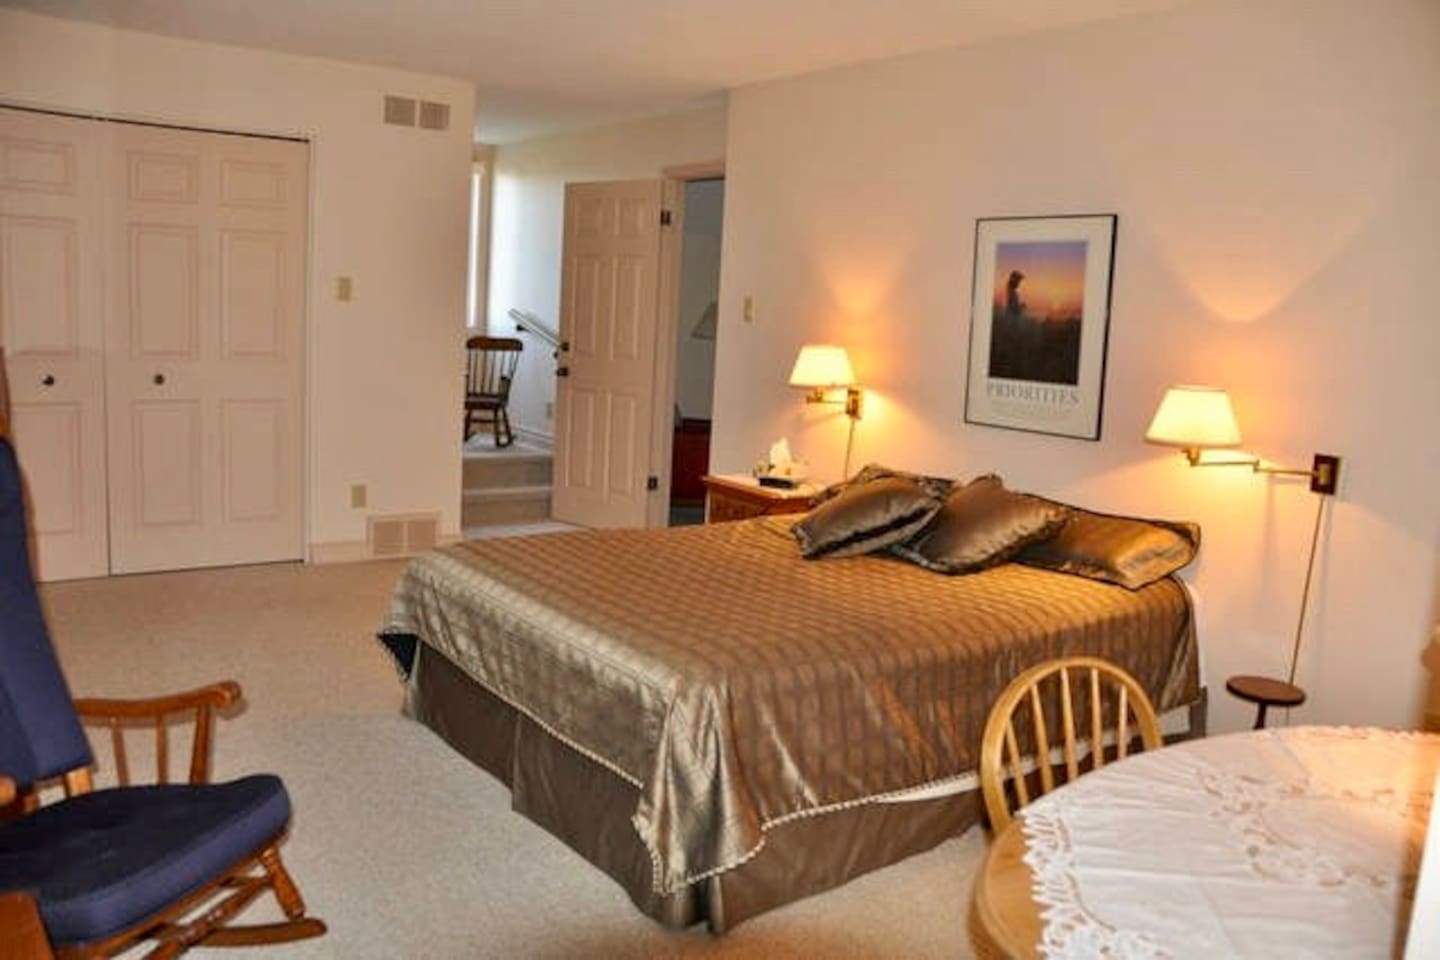 Tall Pines Bed Breakfast Room 4 Bed And Breakfasts For Rent